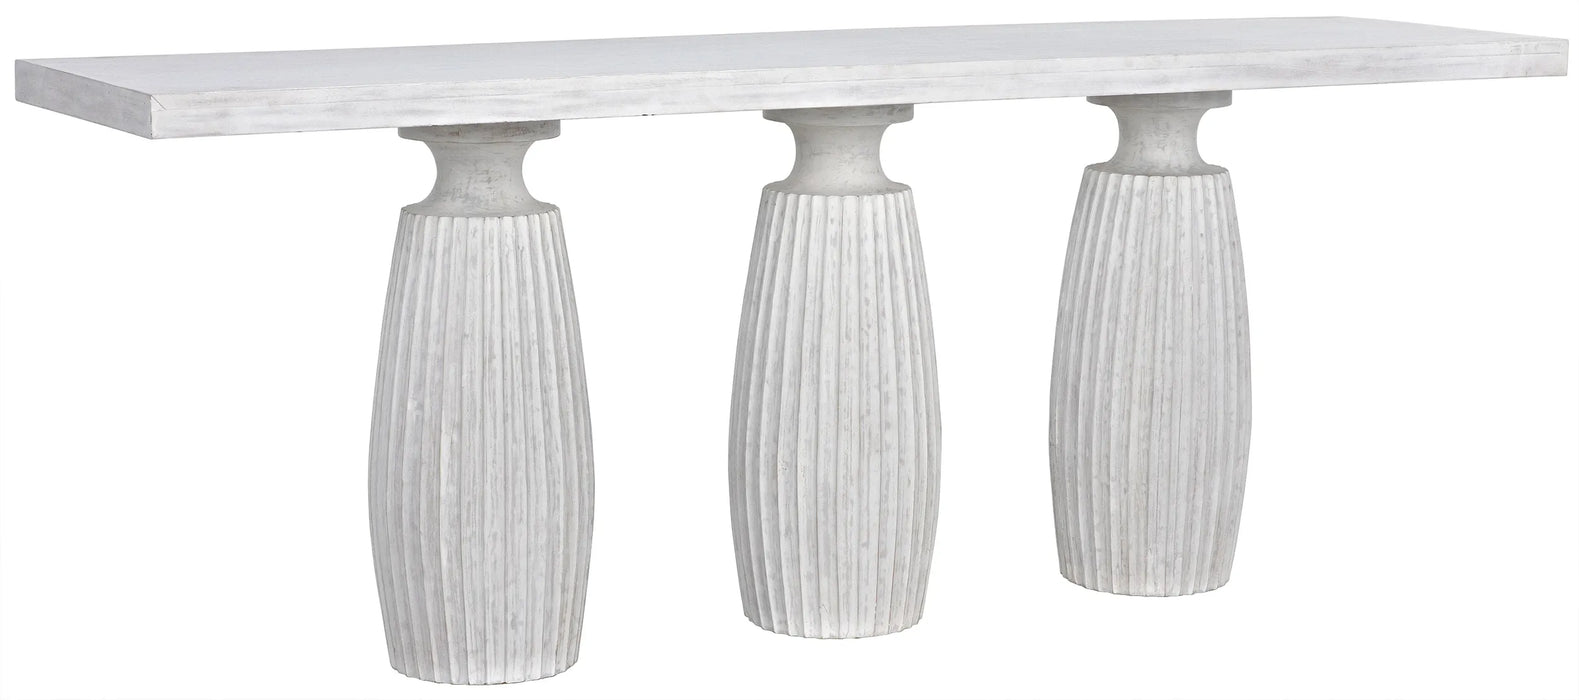 NOIR Furniture - Evelyn Console, White Wash - GCON373WH